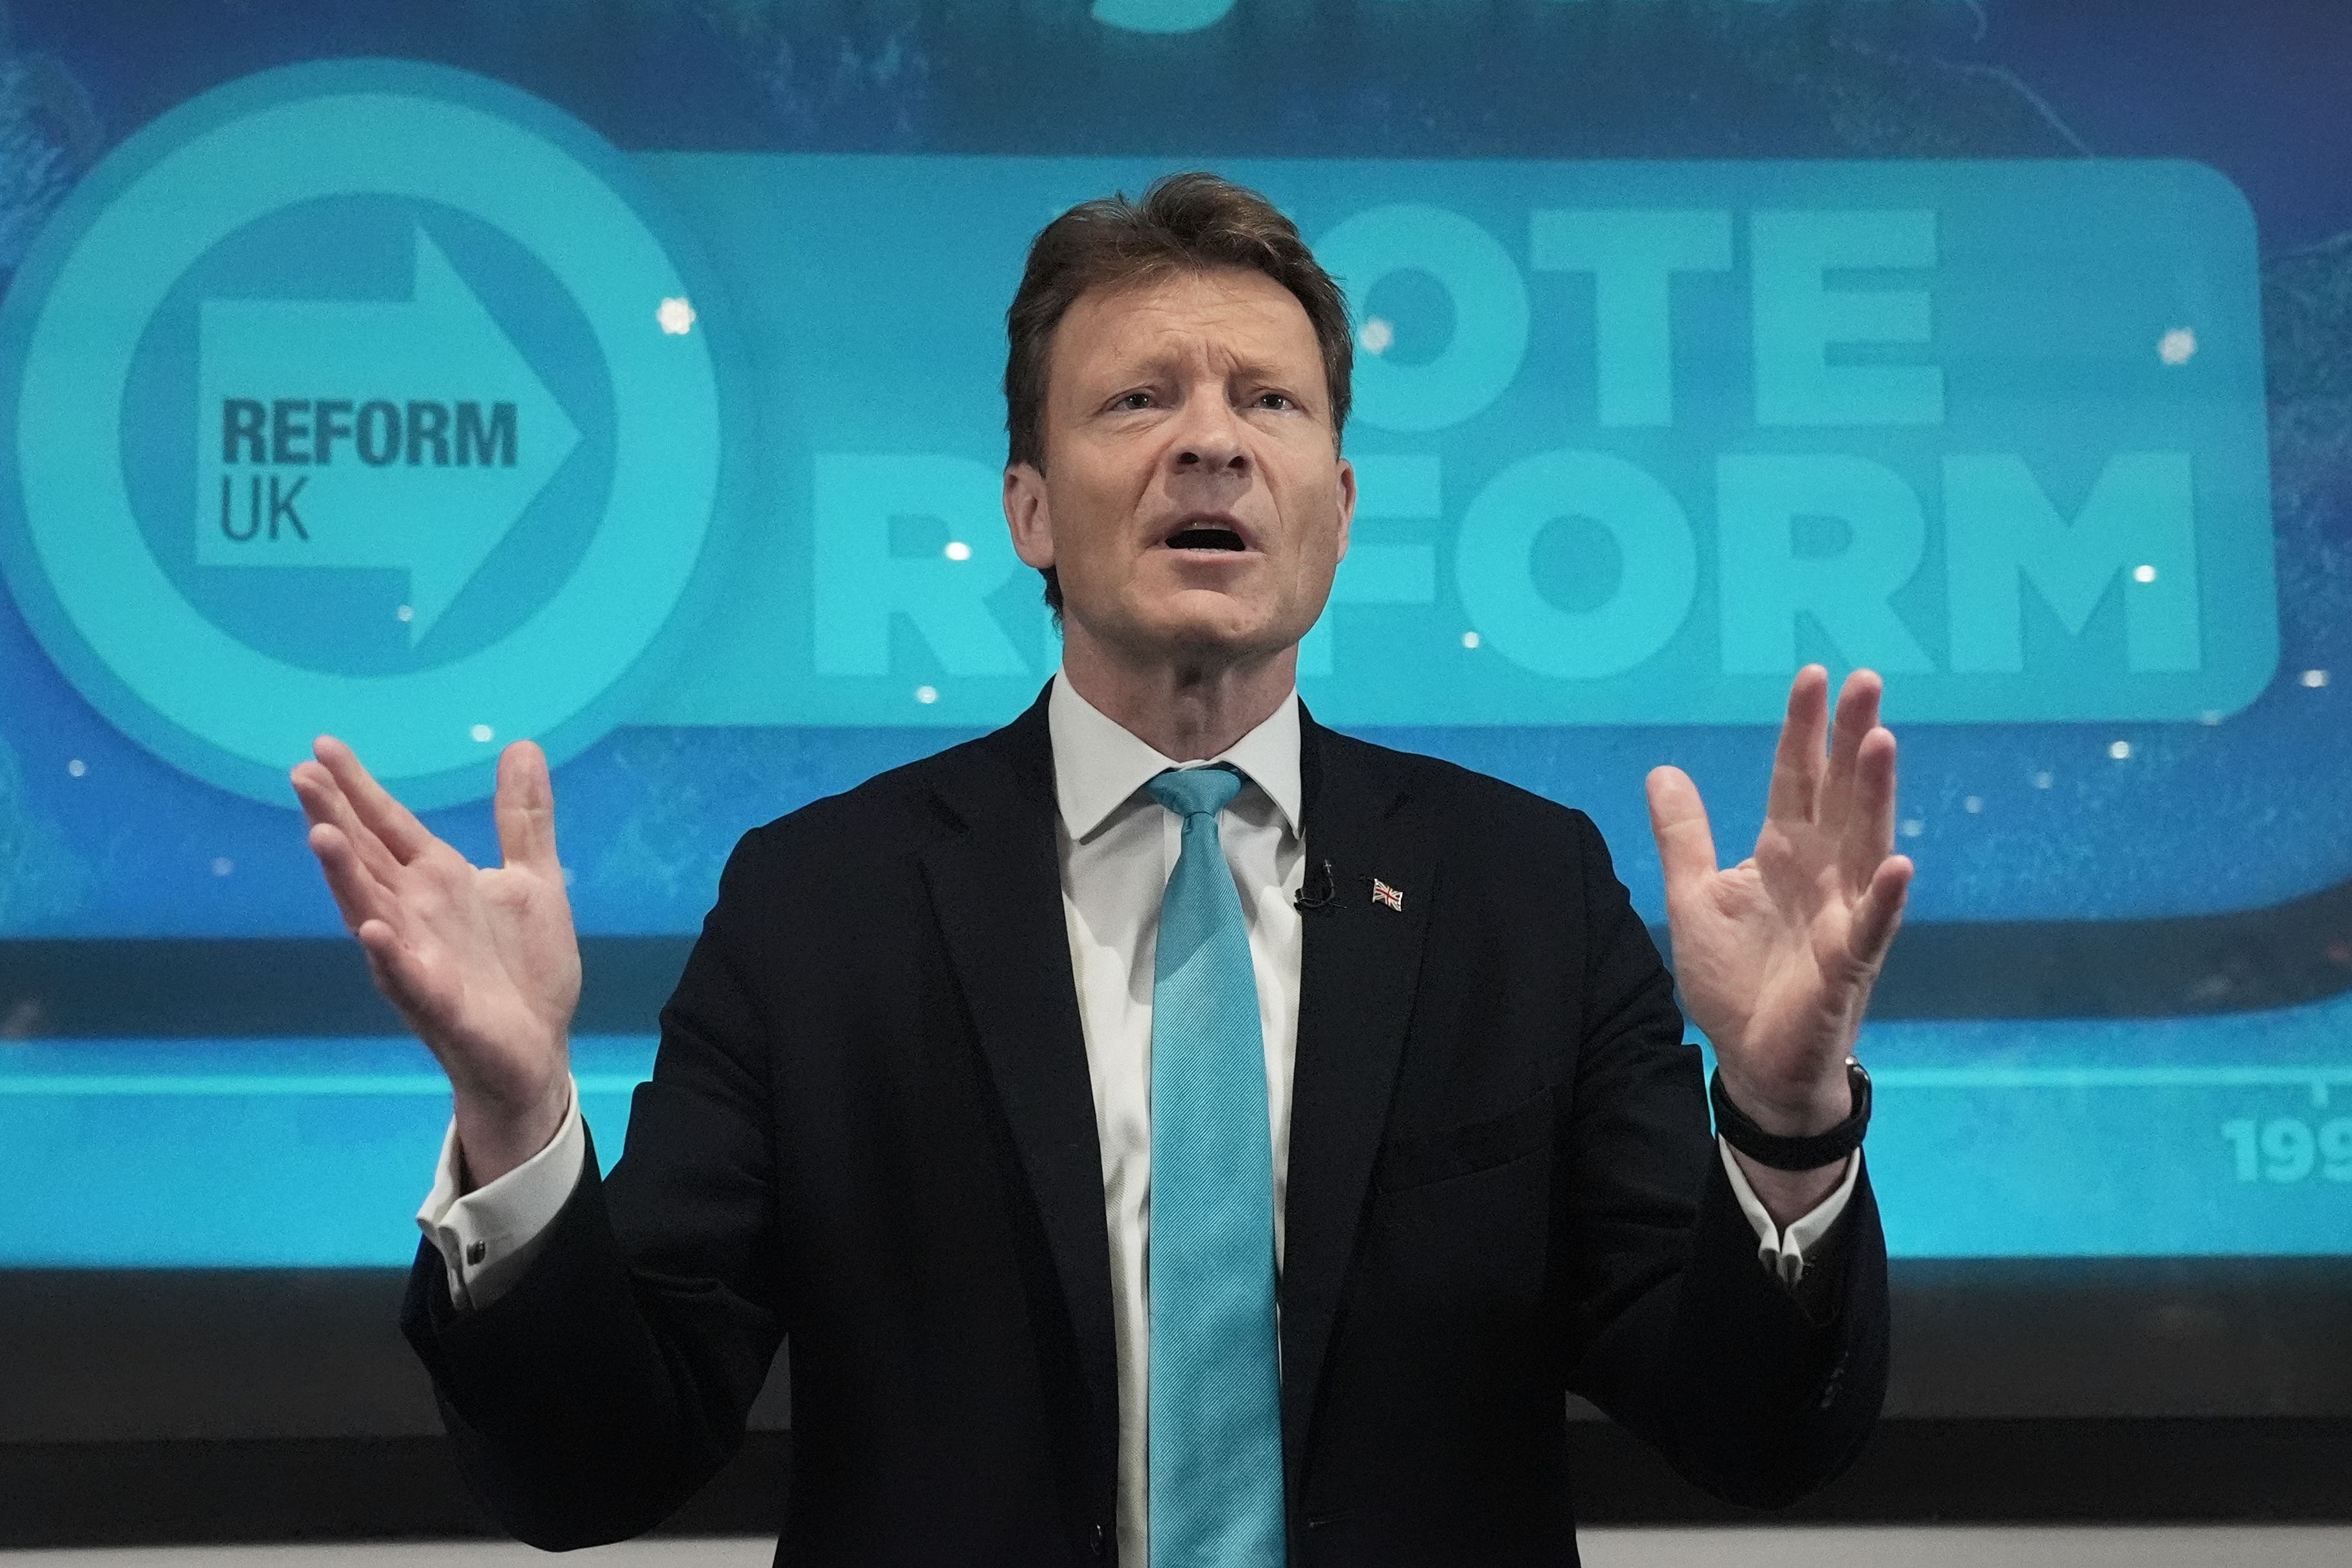 Leader of Reform UK Richard Tice speaking during a General Election campaign launch (Lucy North/PA)